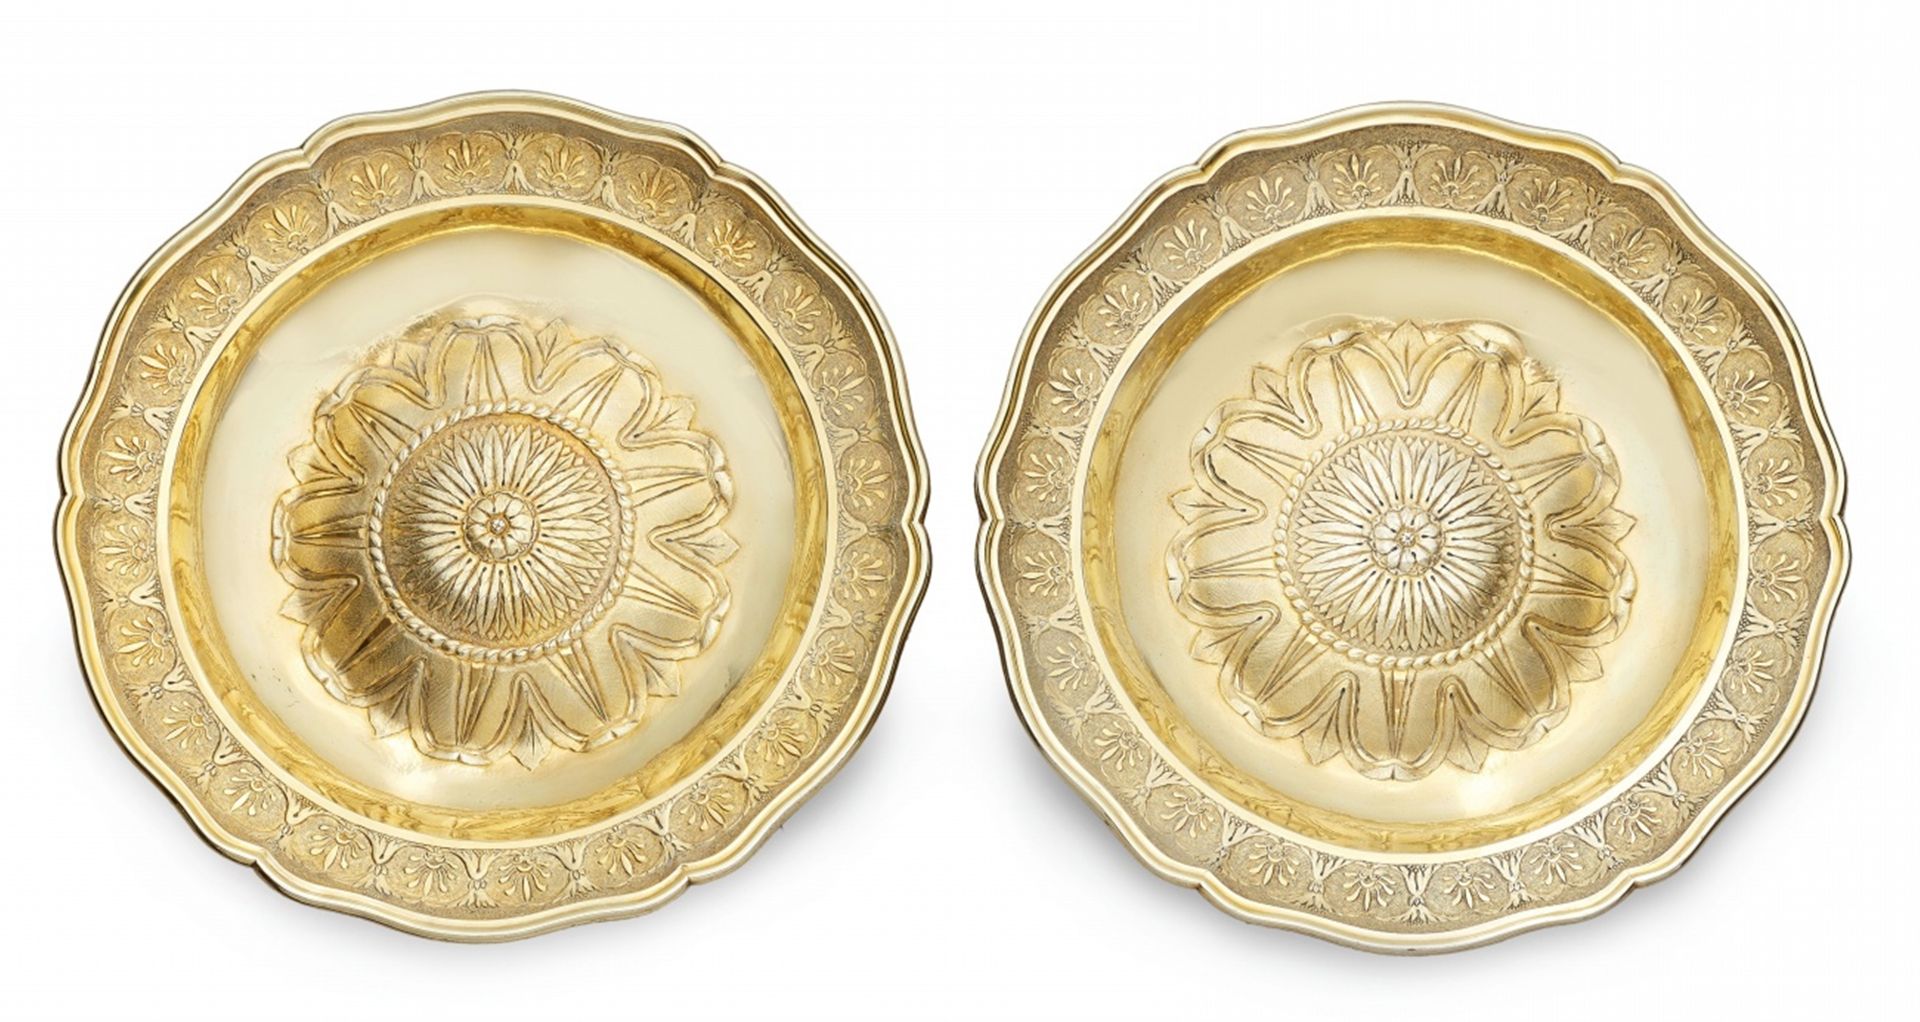 A pair of silver gilt plaques made for the Black Sea fleet of Catherine the Great